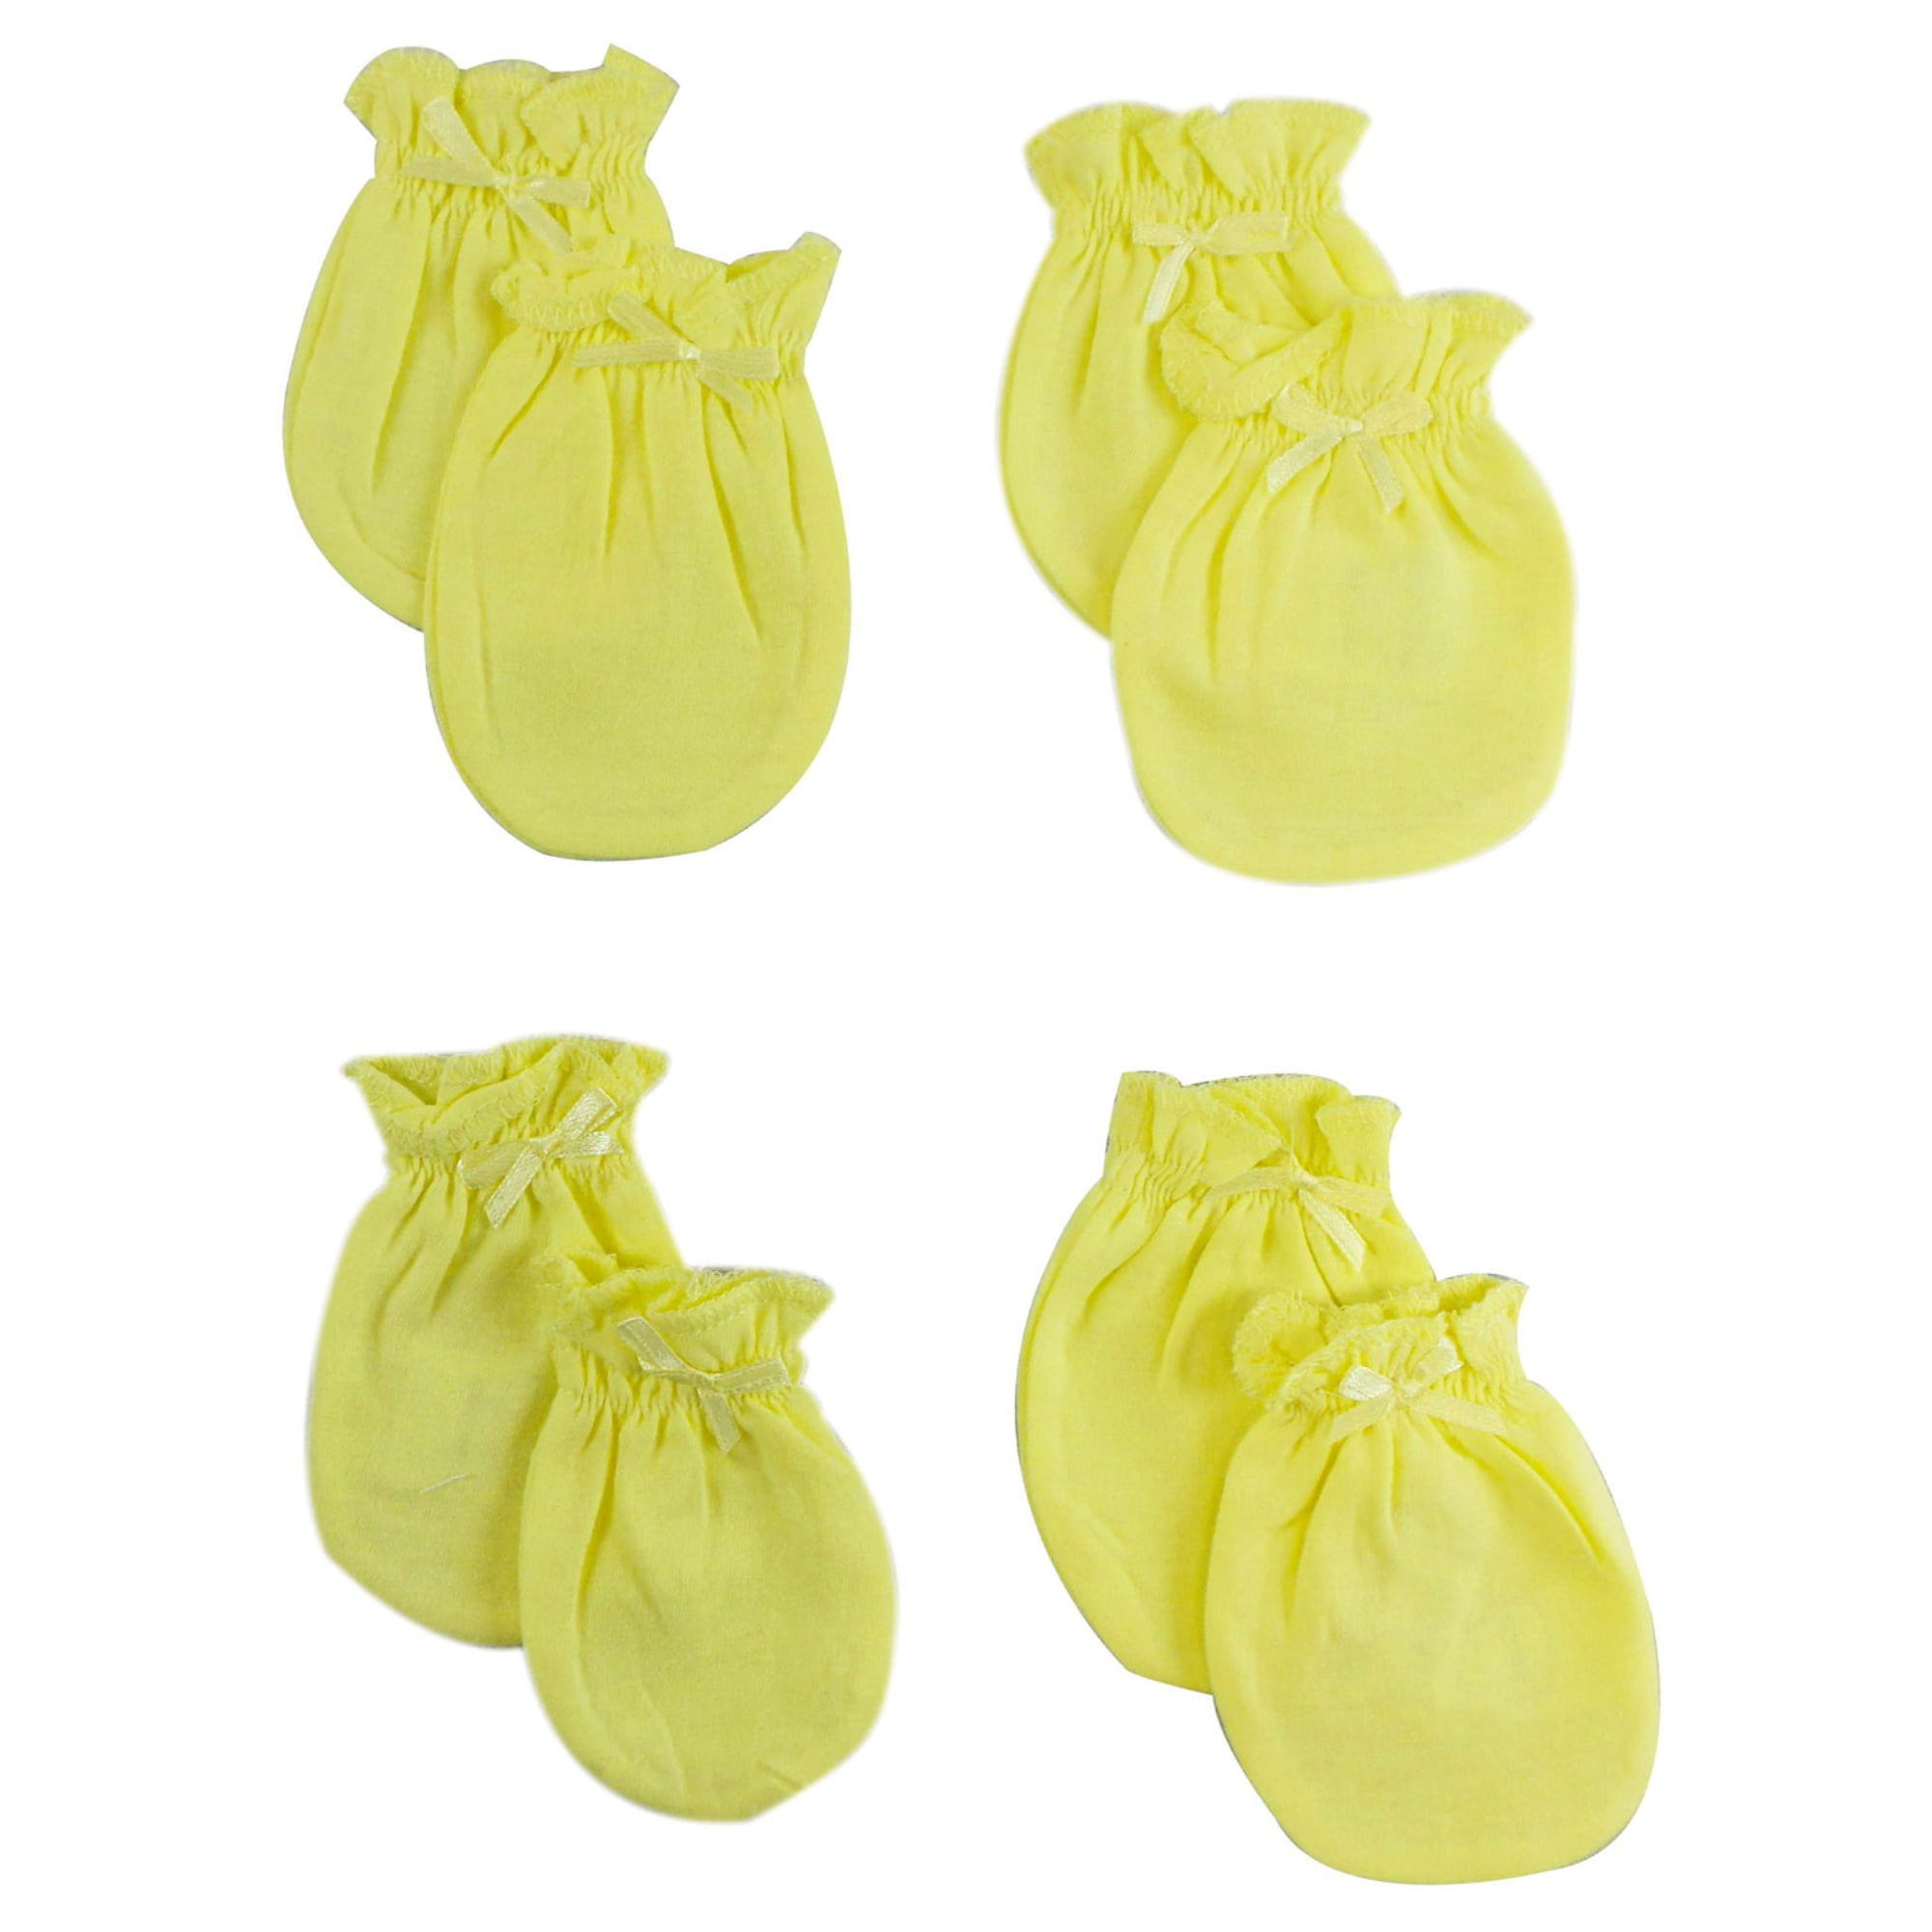 Infant Mittens, Yellow - Pack Of 4